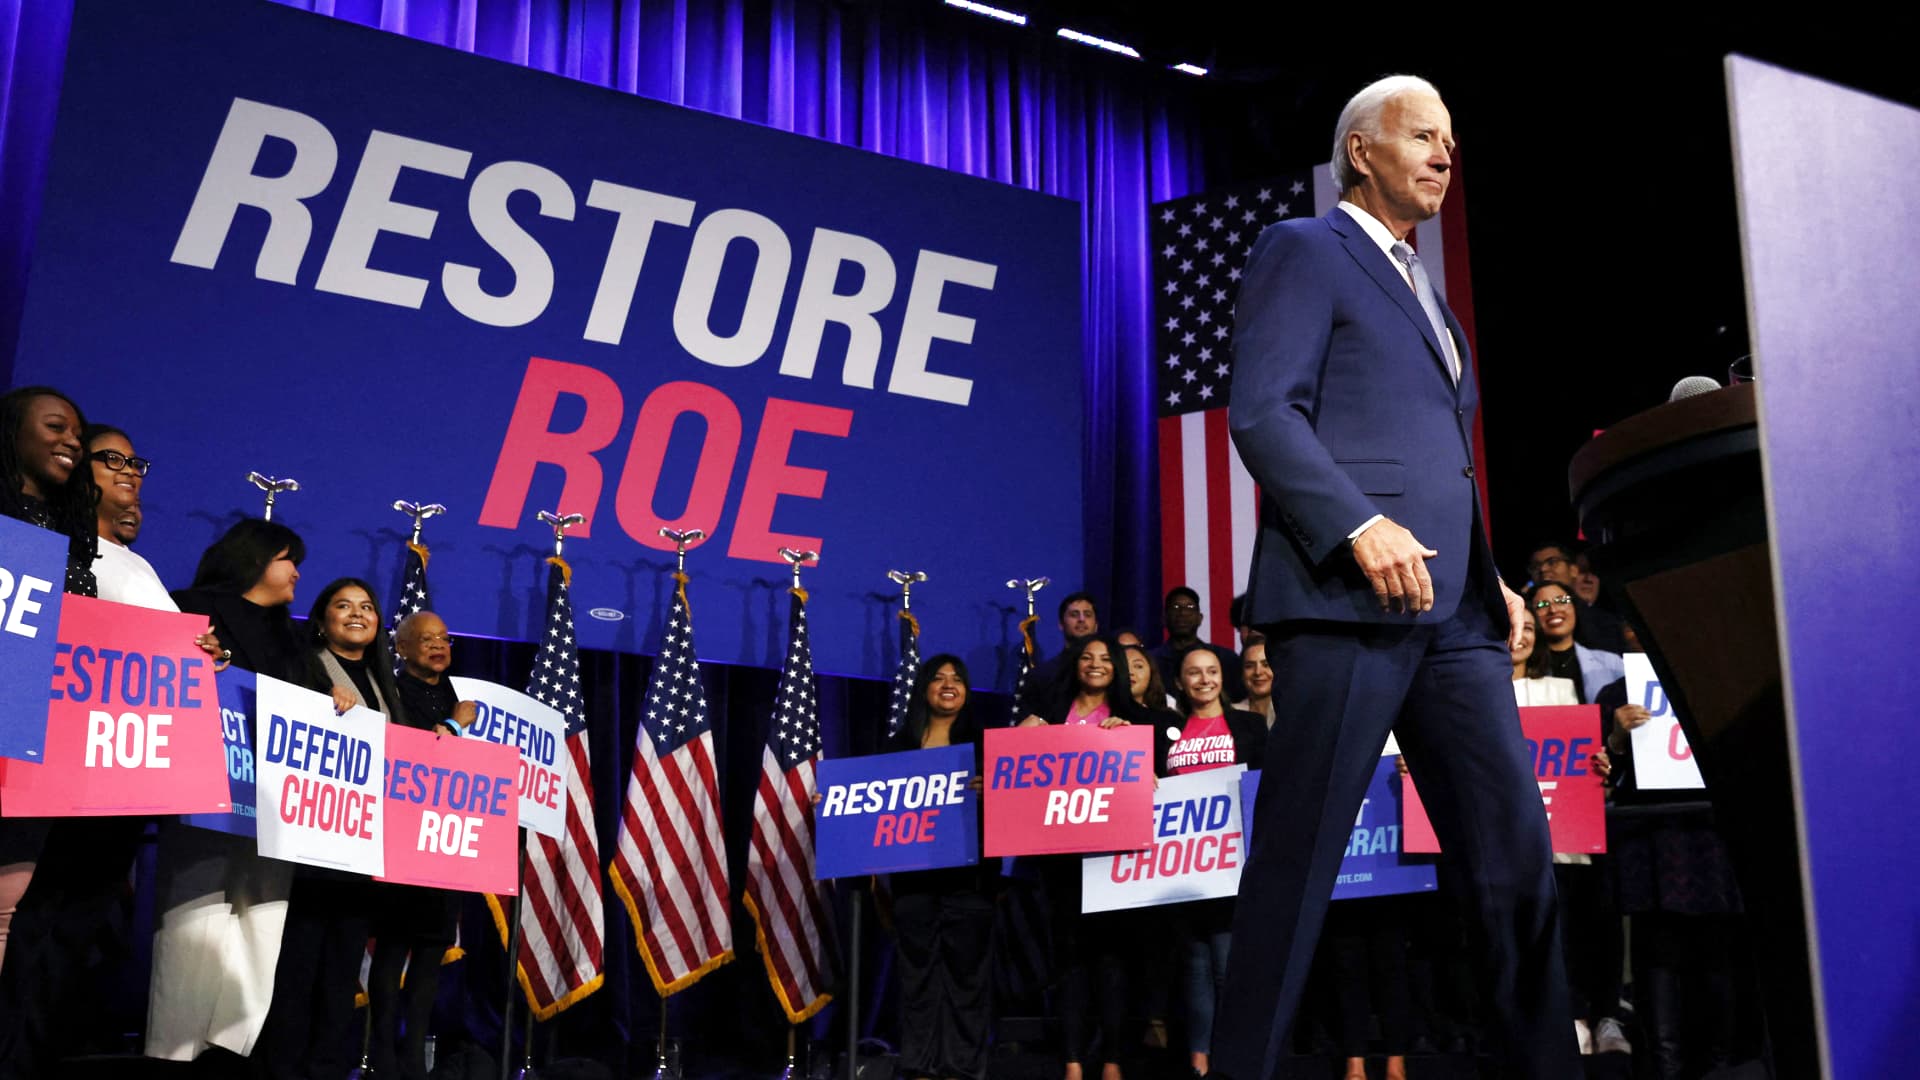 U.S. President Joe Biden delivers remarks on abortion rights in a speech hosted by the Democratic National Committee (DNC) at the Howard Theatre in Washington, October 18, 2022.